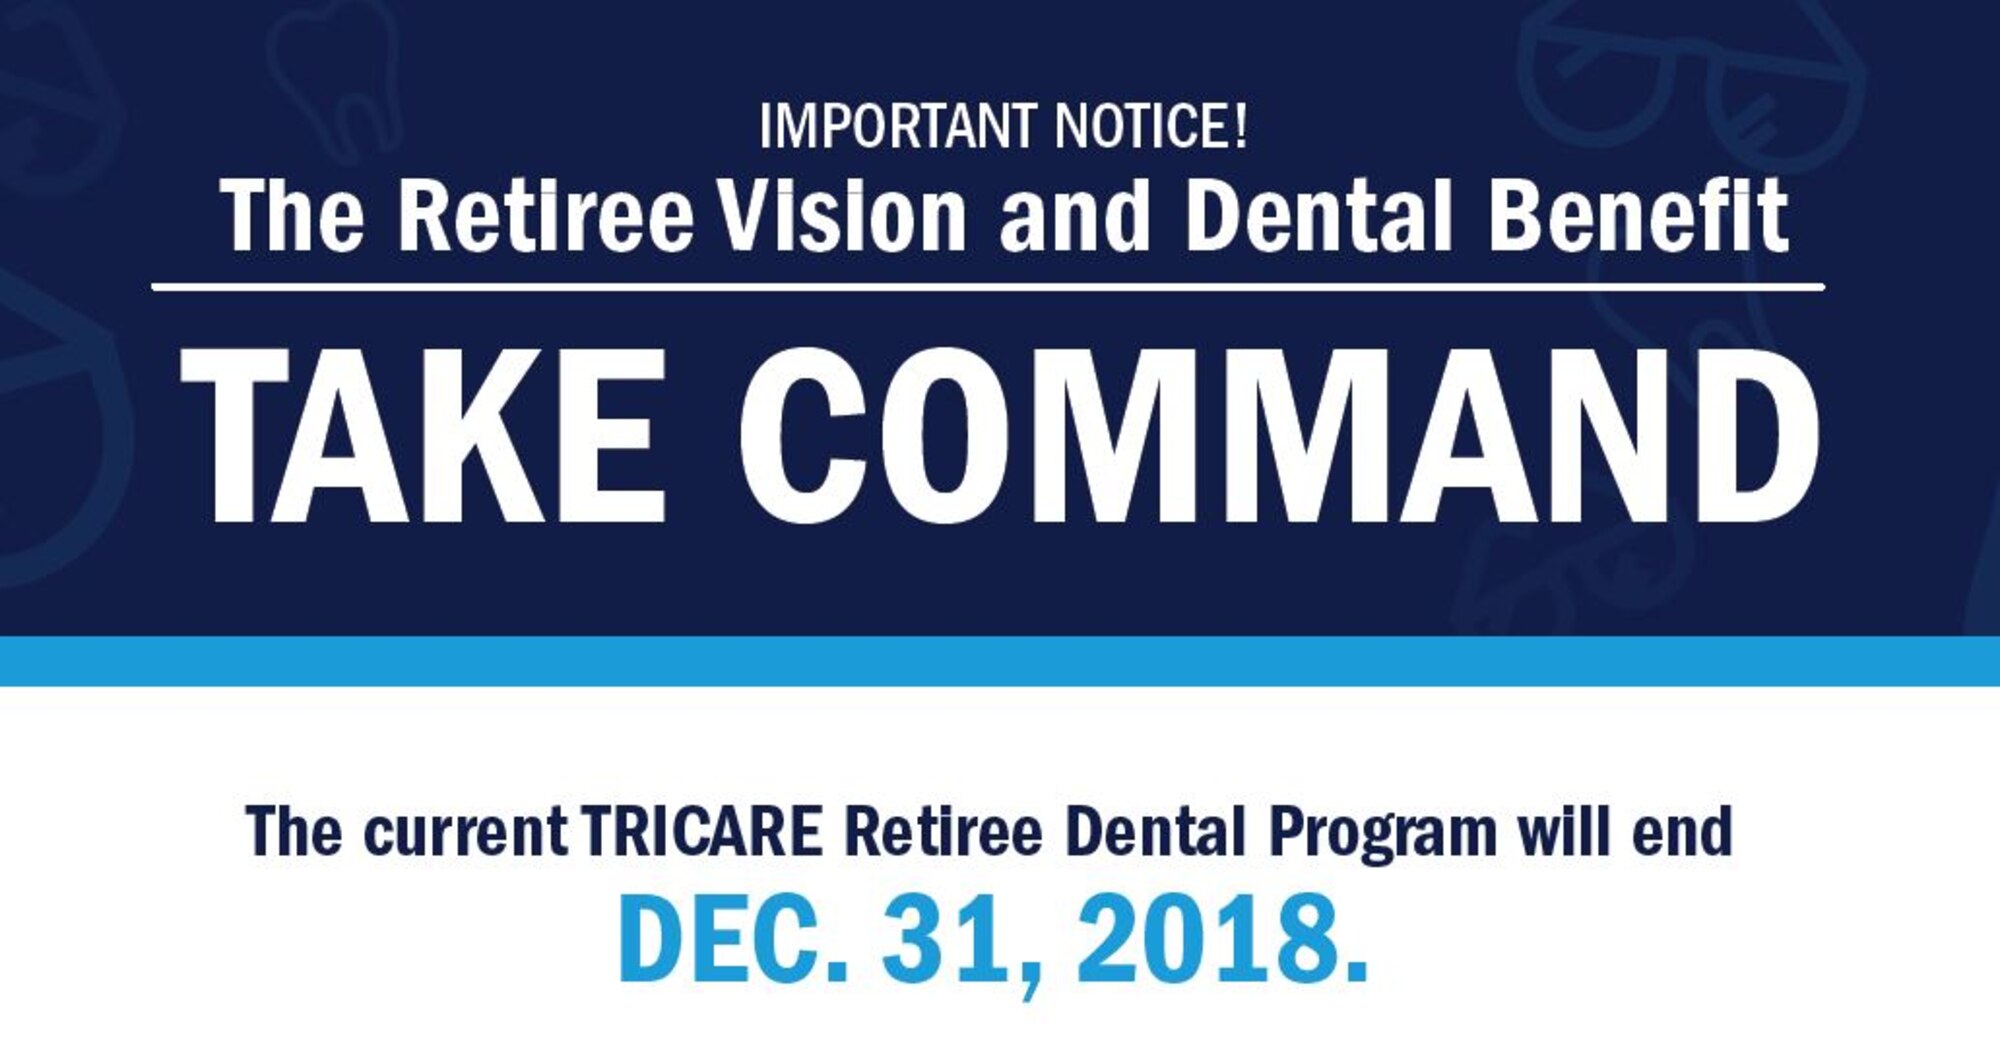 The TRICARE Retiree Dental Program ends on Dec. 31, 2018. Beginning in 2019, dental and vision plans will be available through the Federal Employees Dental and Vision Insurance Program.